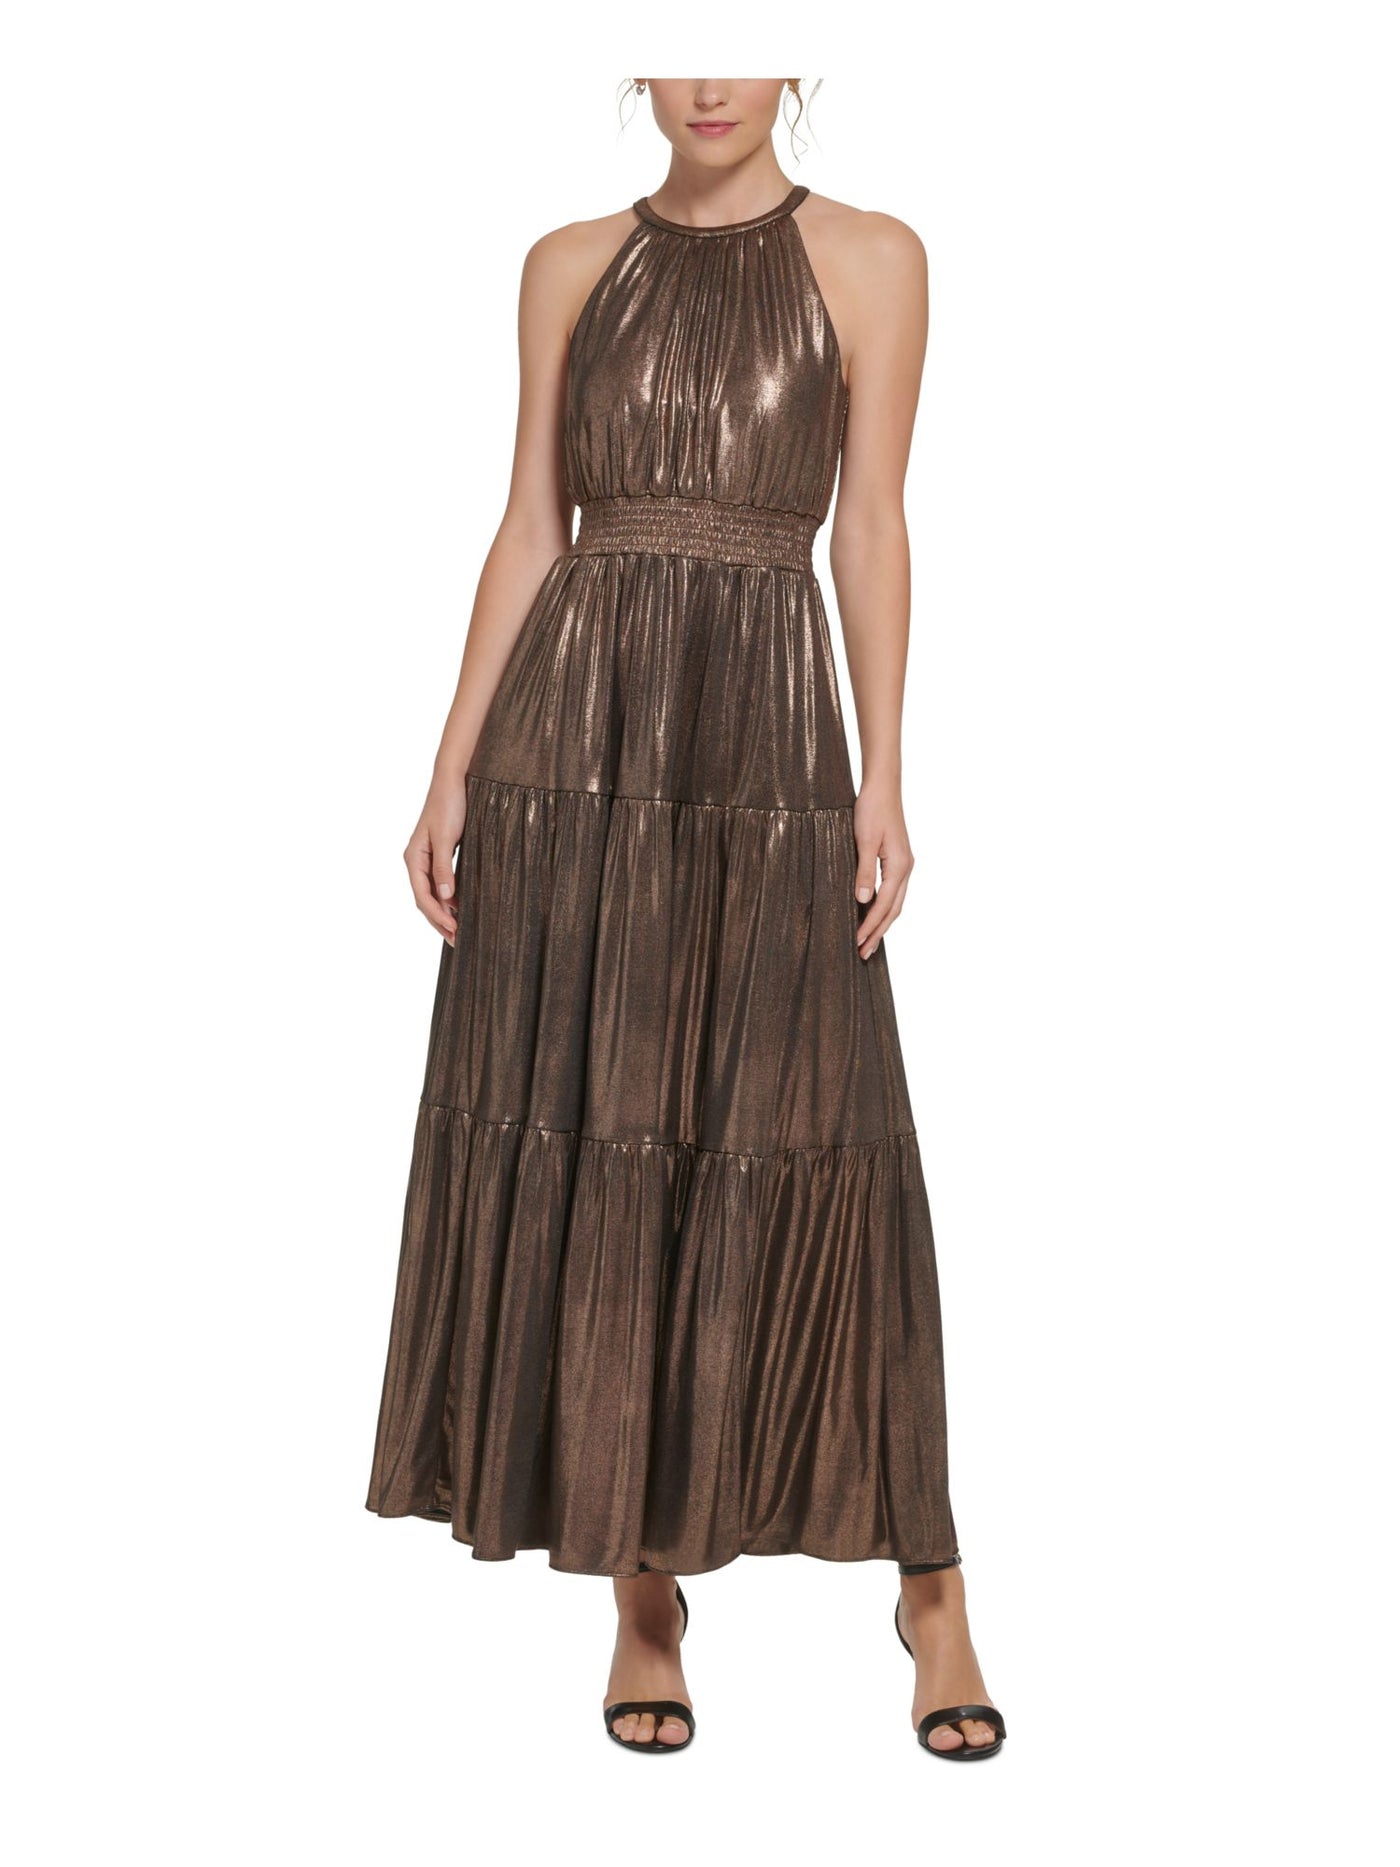 ELIZA J Womens Brown Zippered Smocked Tiered Lined Bodice Sleeveless Halter Maxi Evening Fit + Flare Dress 6